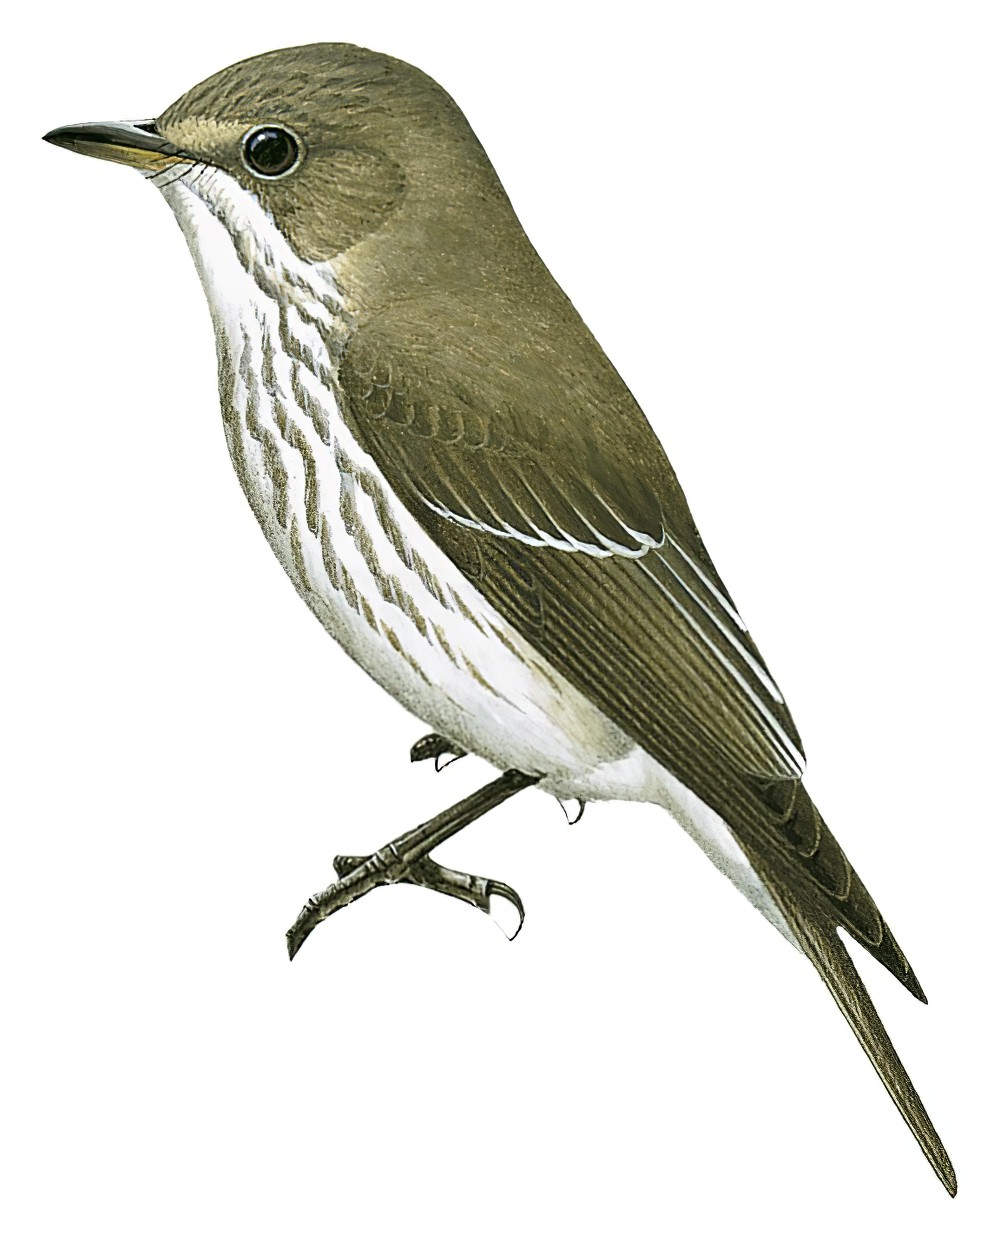 Gray-streaked Flycatcher / Muscicapa griseisticta